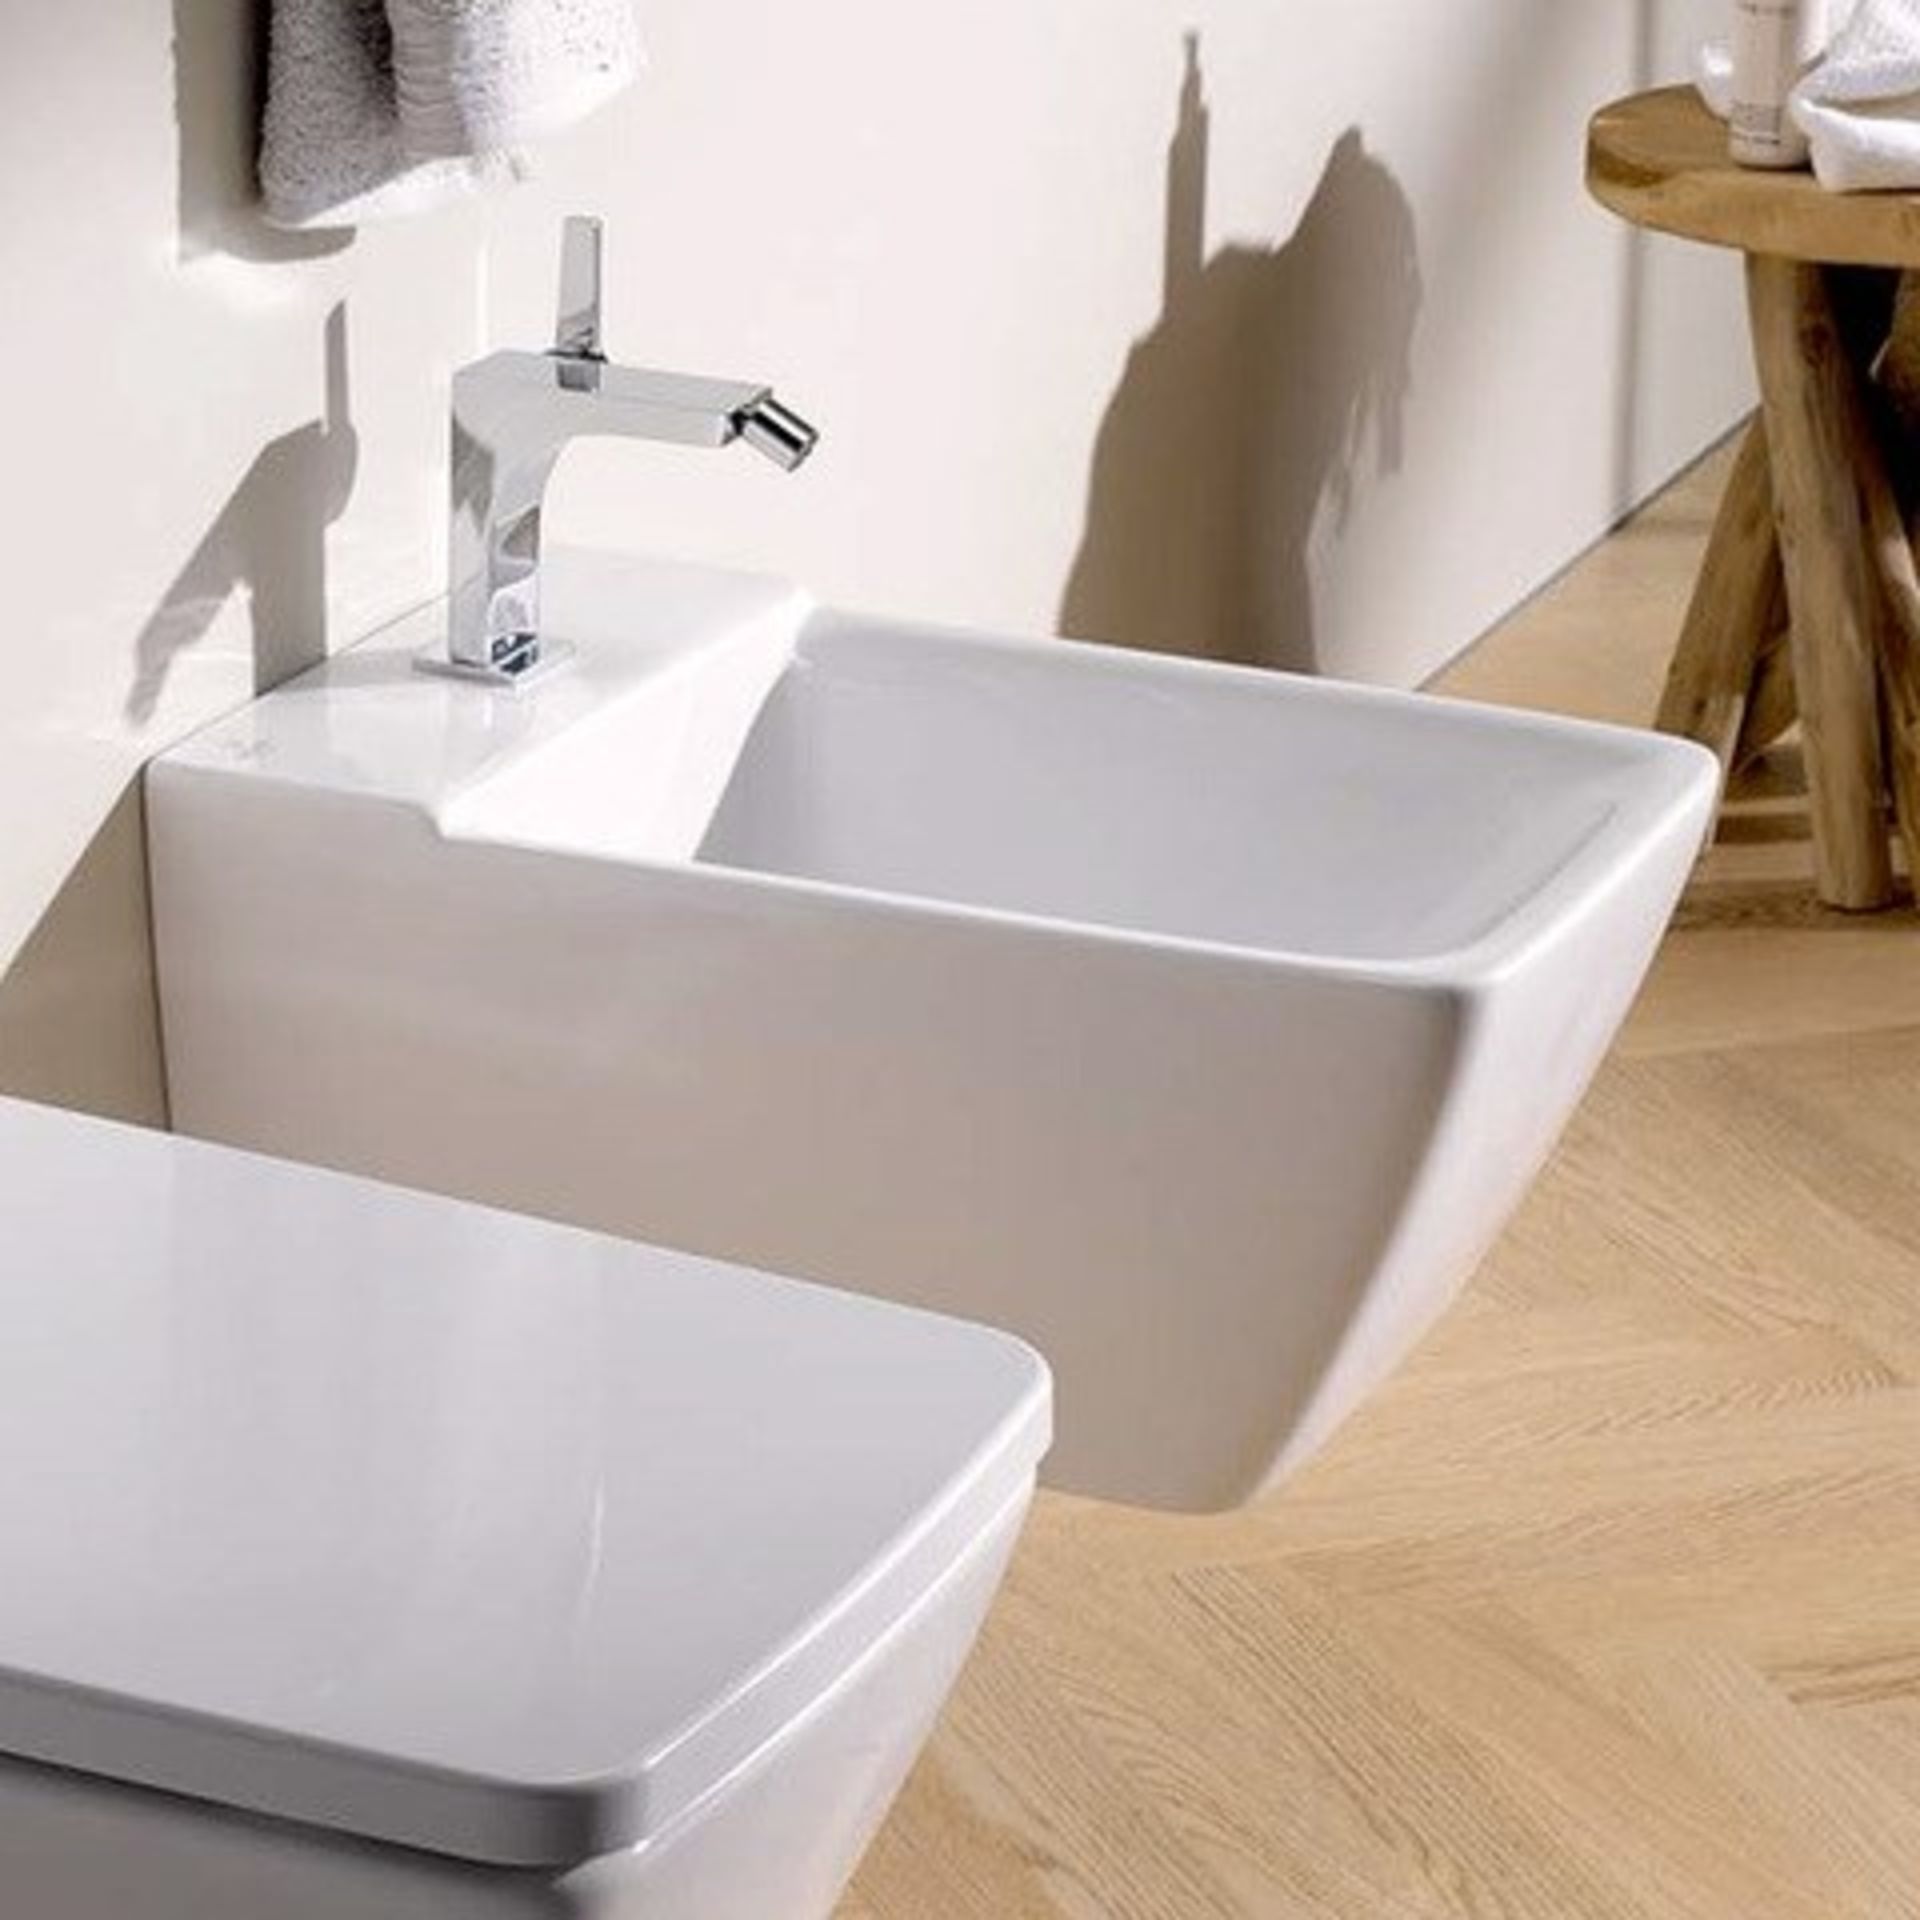 NEW (XL162) Xeno 540mm Bidet Wall Hung.RRP £389.99.A premium bathroom series of products with ...